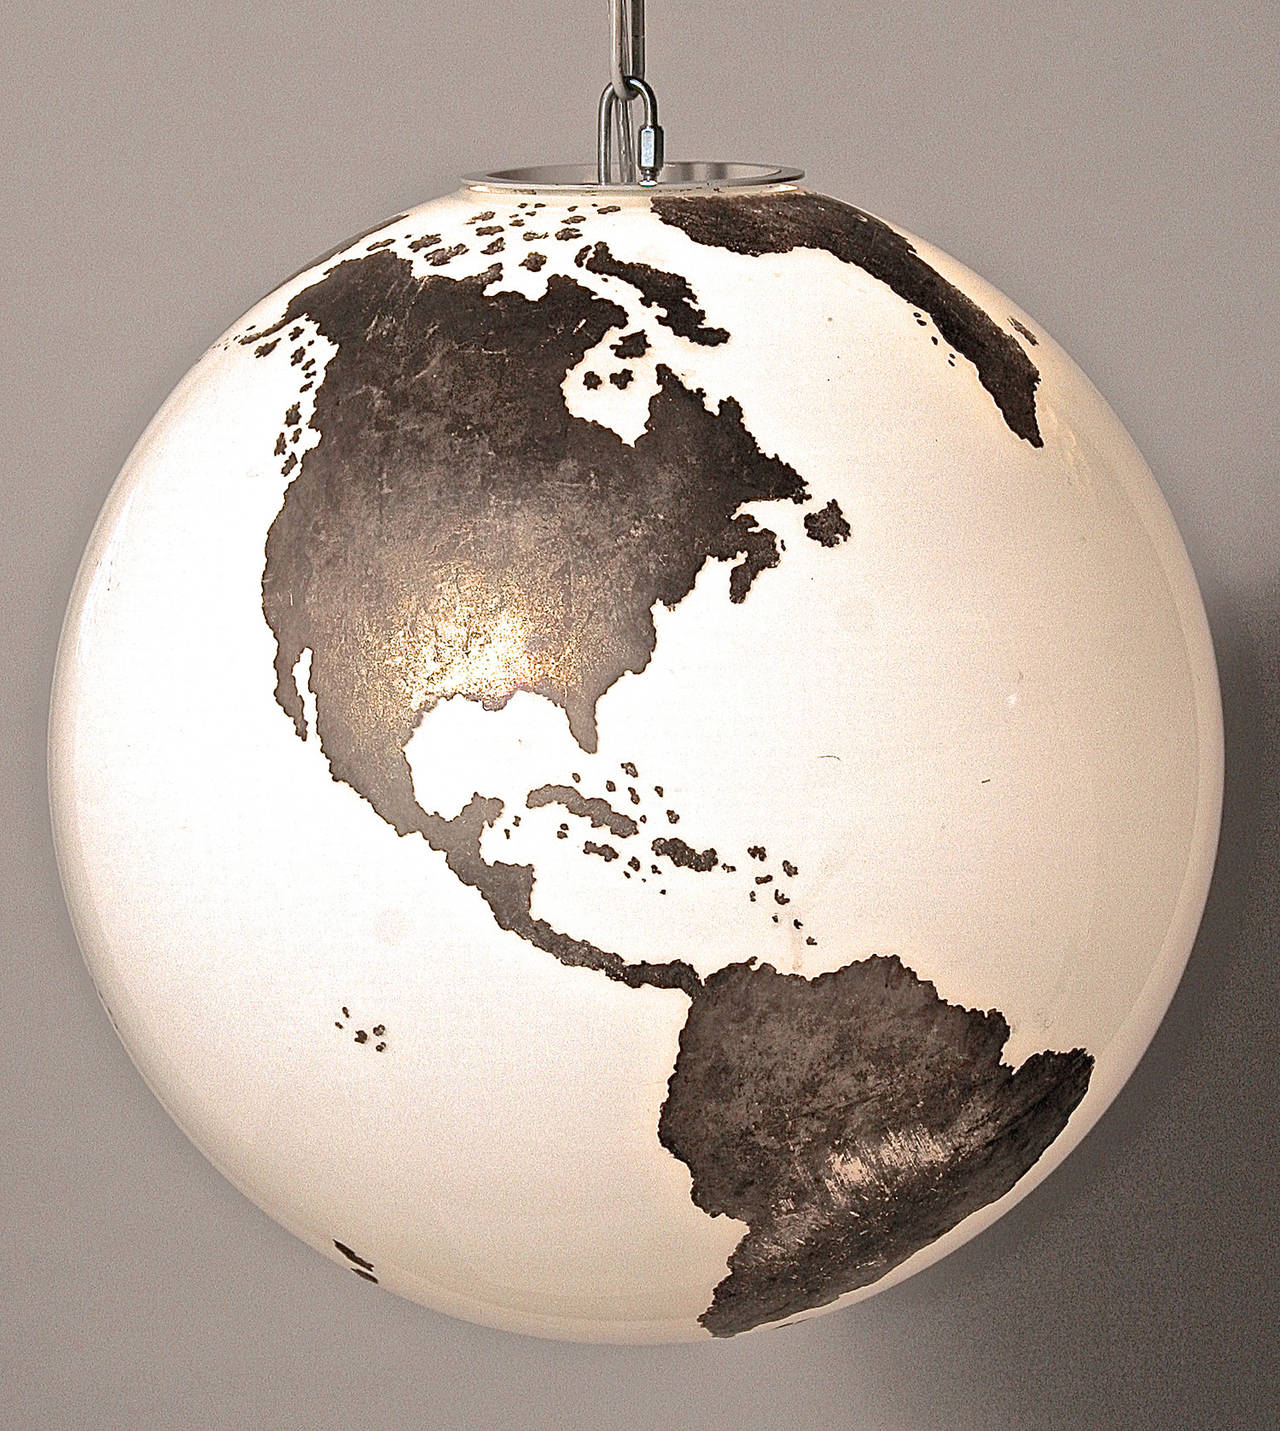 The map is platinum applied to the surface of the glass that has a unique and wonderful character. The price is for one light but there are two available.